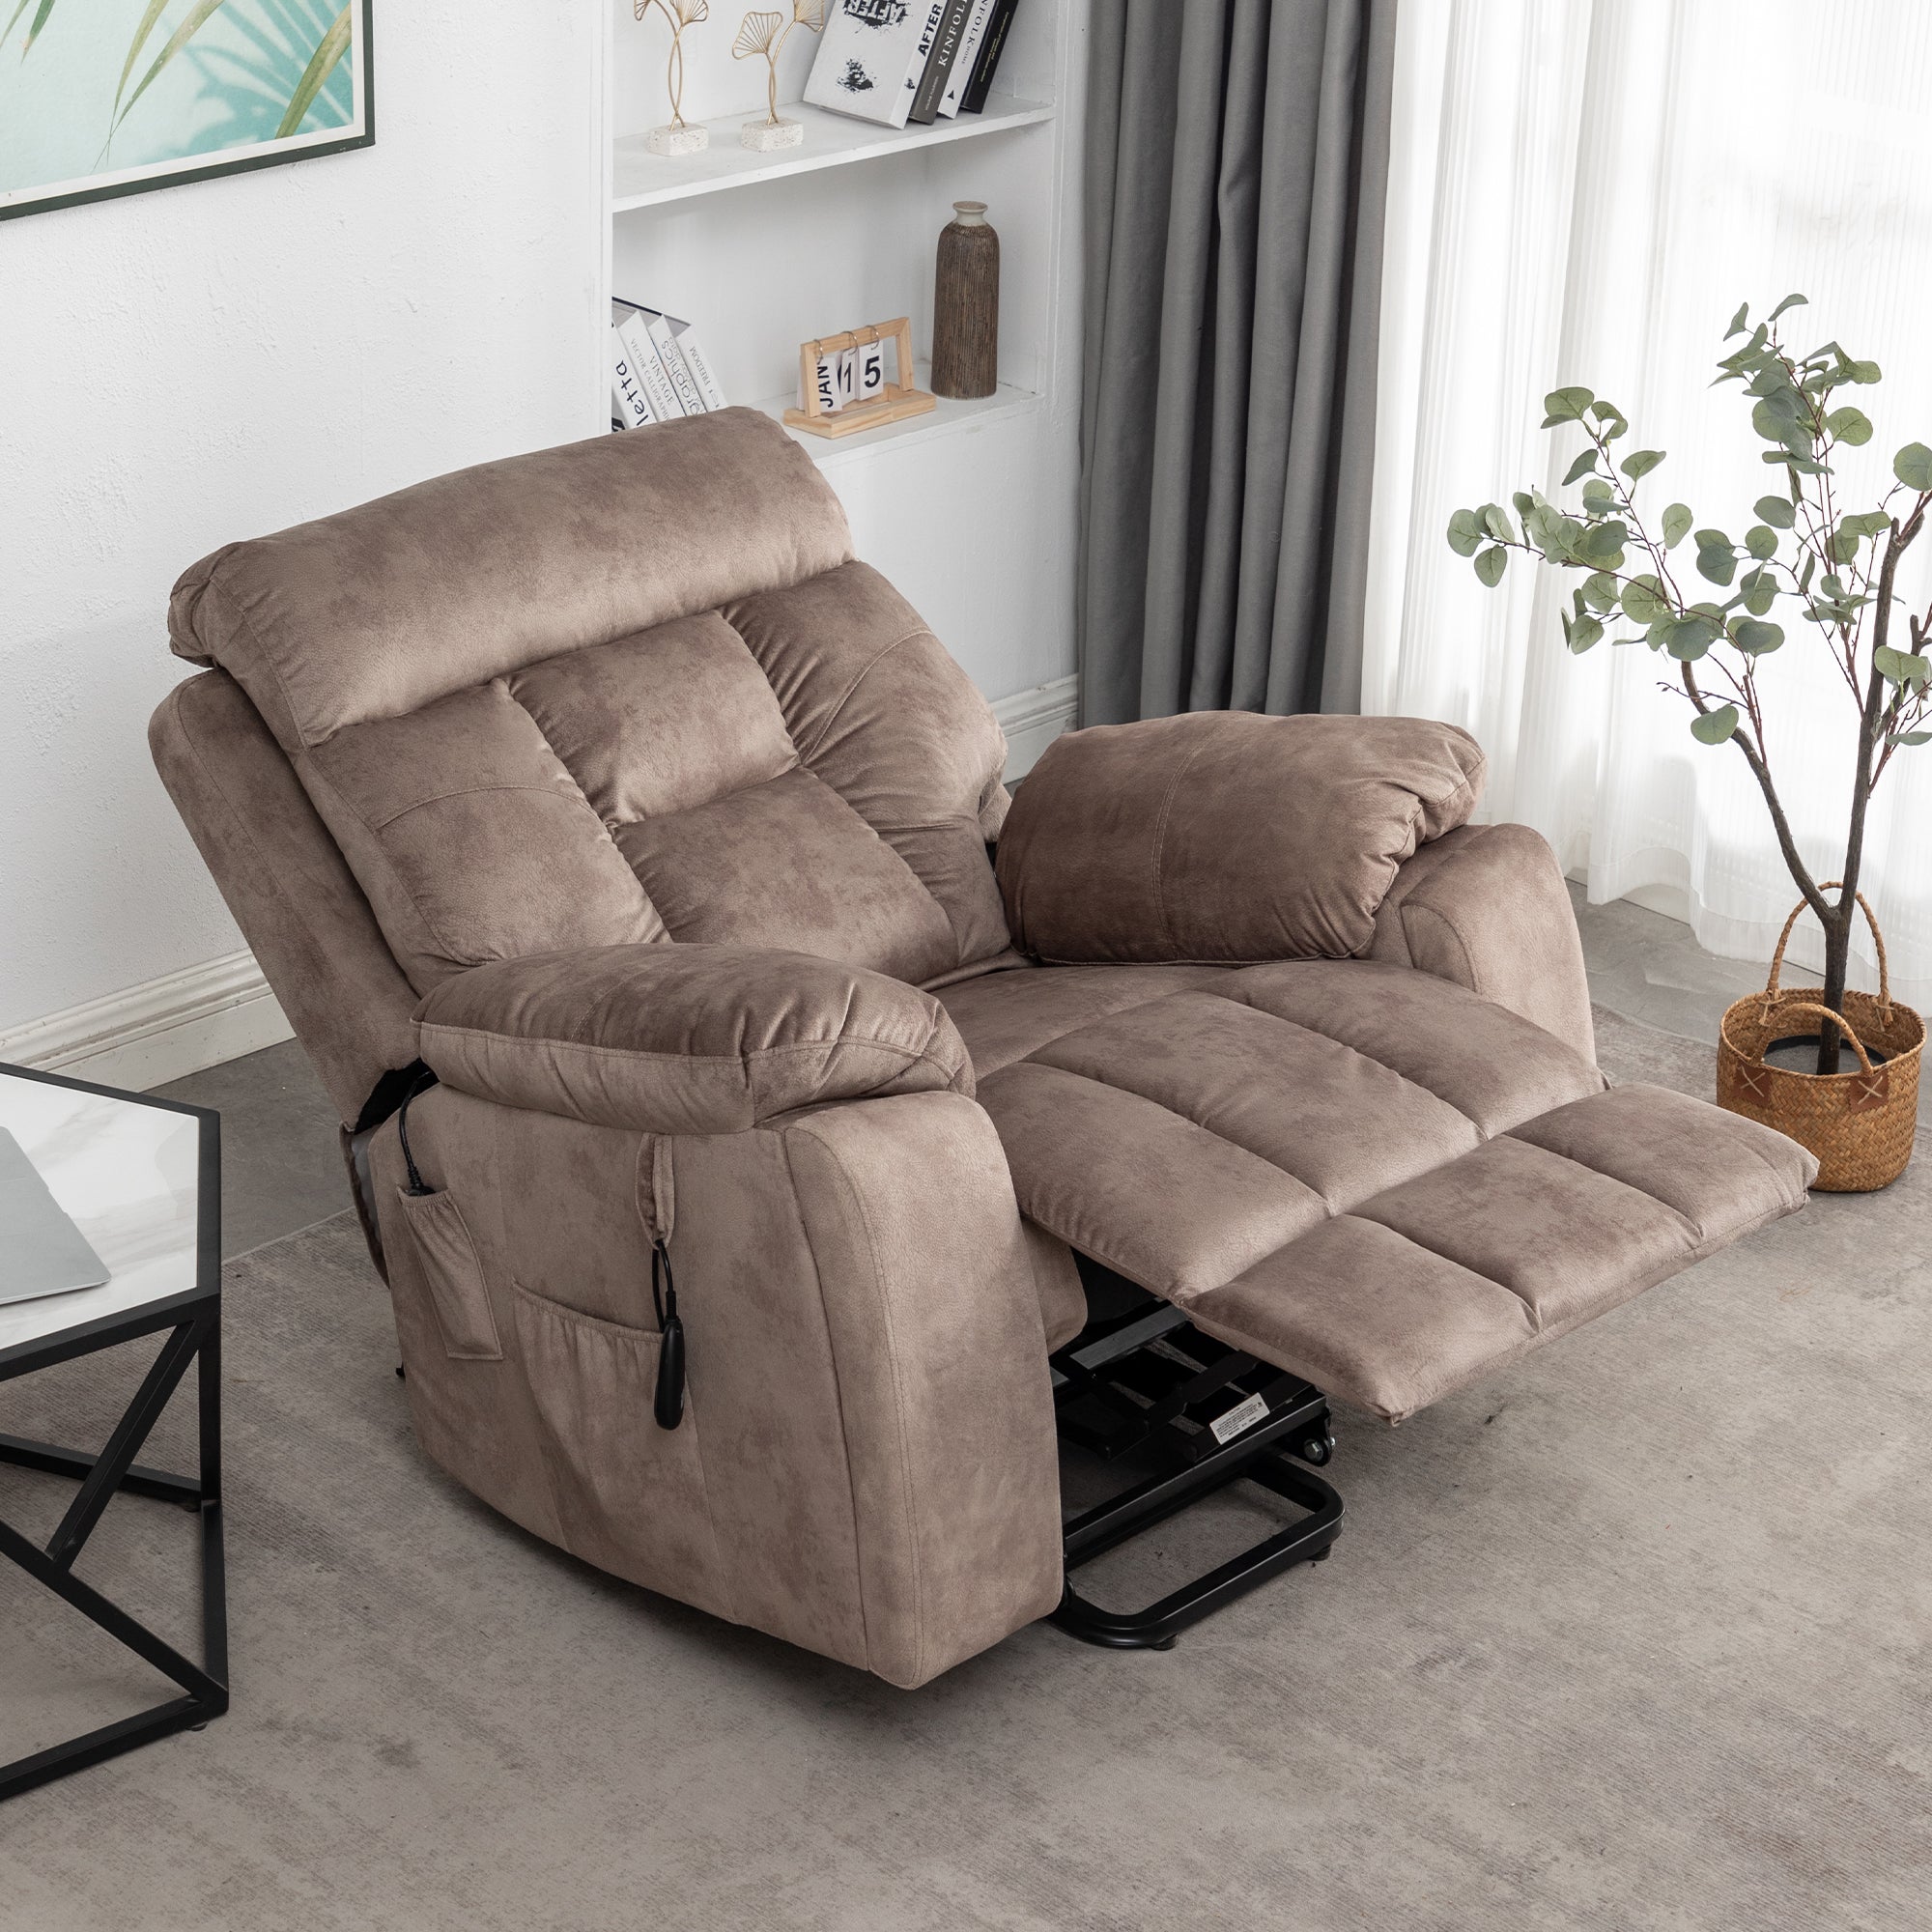 uhomepro Large Massage Recliner Chair, Velvet Electric Heated